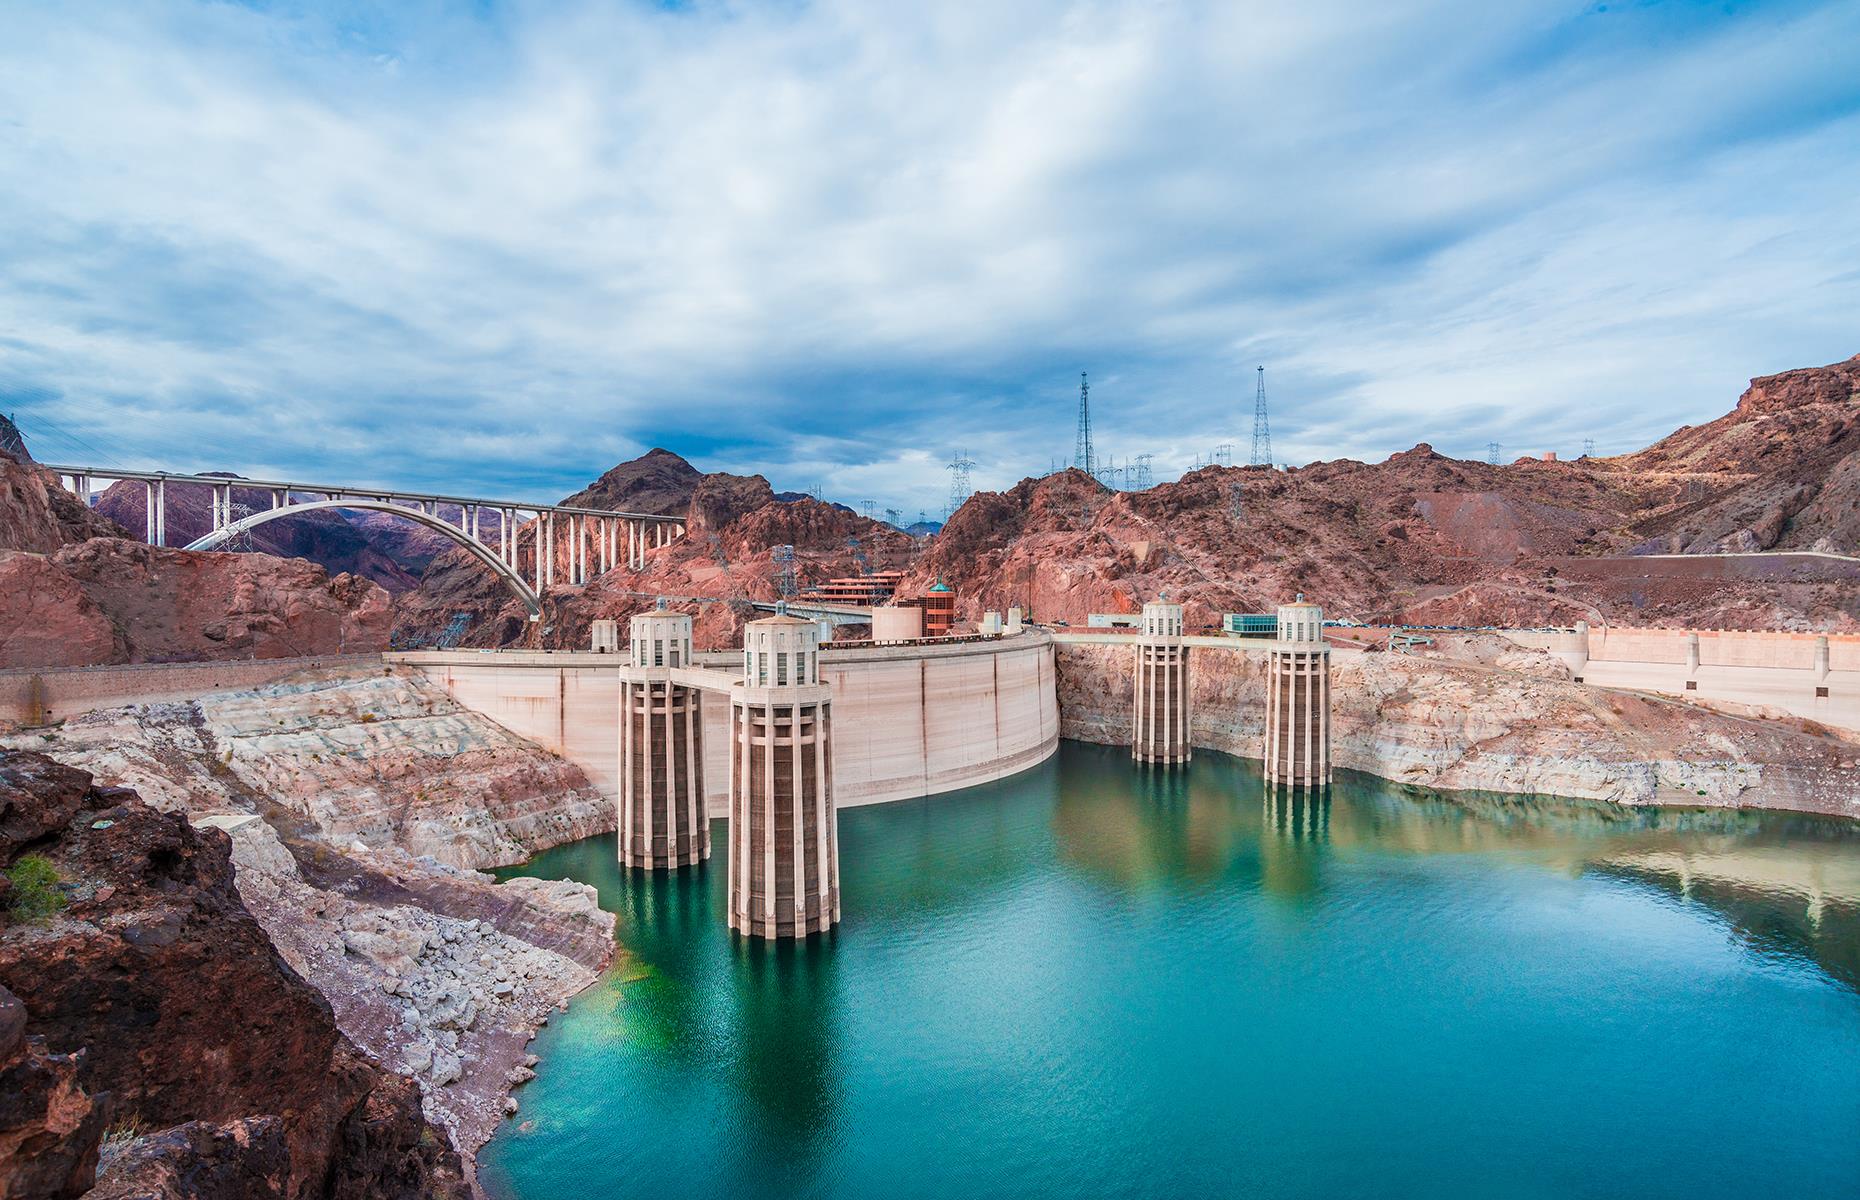 <p>One of the most impressive feats of engineering in the US, the Hoover Dam was completed in 1935 to save the local farmlands from frequent flooding and supply the surrounding states with electricity. Situated around 30 miles from the neon lights of Las Vegas, the dam is a marvel to see in real life. <a href="https://www.usbr.gov/lc/hooverdam/service/index.html">Guided tours</a> offer an up close and personal view of the mighty structure, giving access to the historic tunnels and original elevators, the inspection tunnels at the center of the dam, and views through the inspection ventilation shaft. Tickets are $30 and are available to buy on-site only.</p>